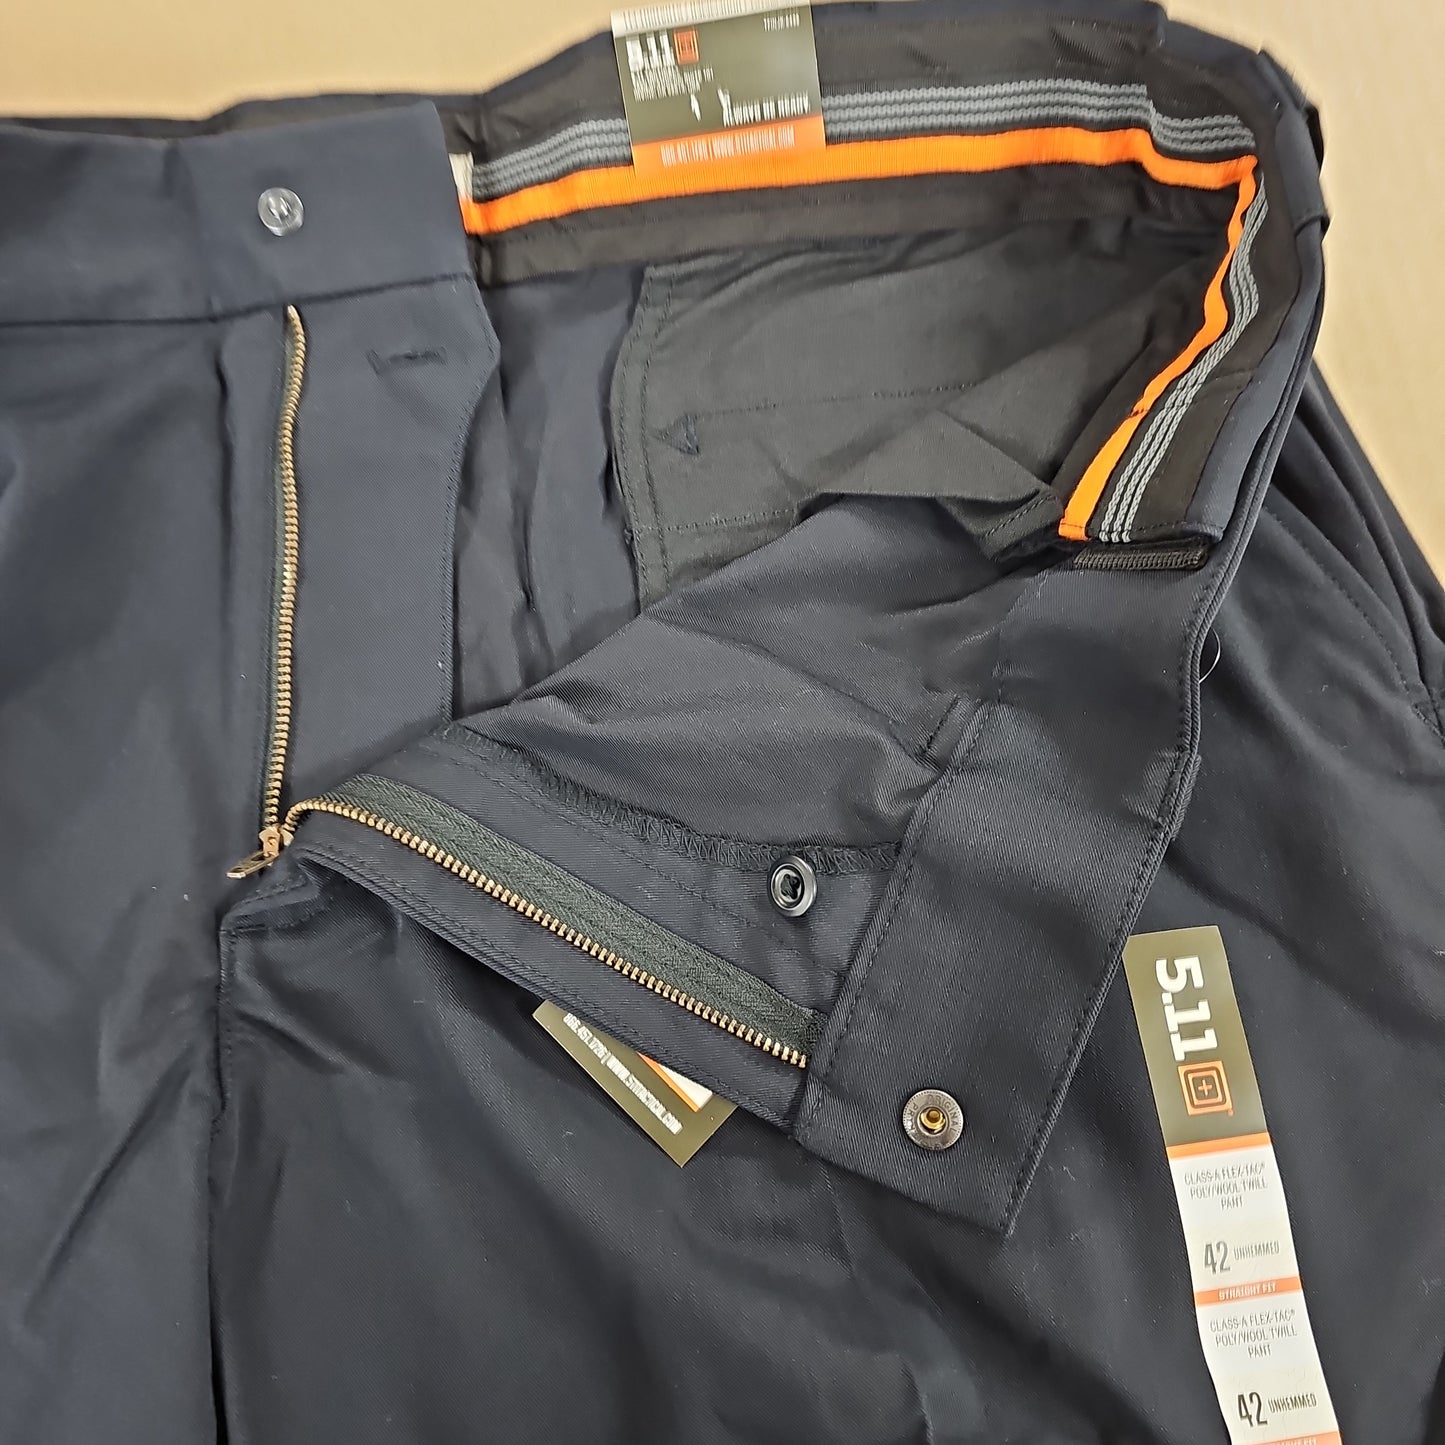 5.11 Tactical Pant: Twill, FT PW, CL-A Mid. Navy, 42 74492-750-42